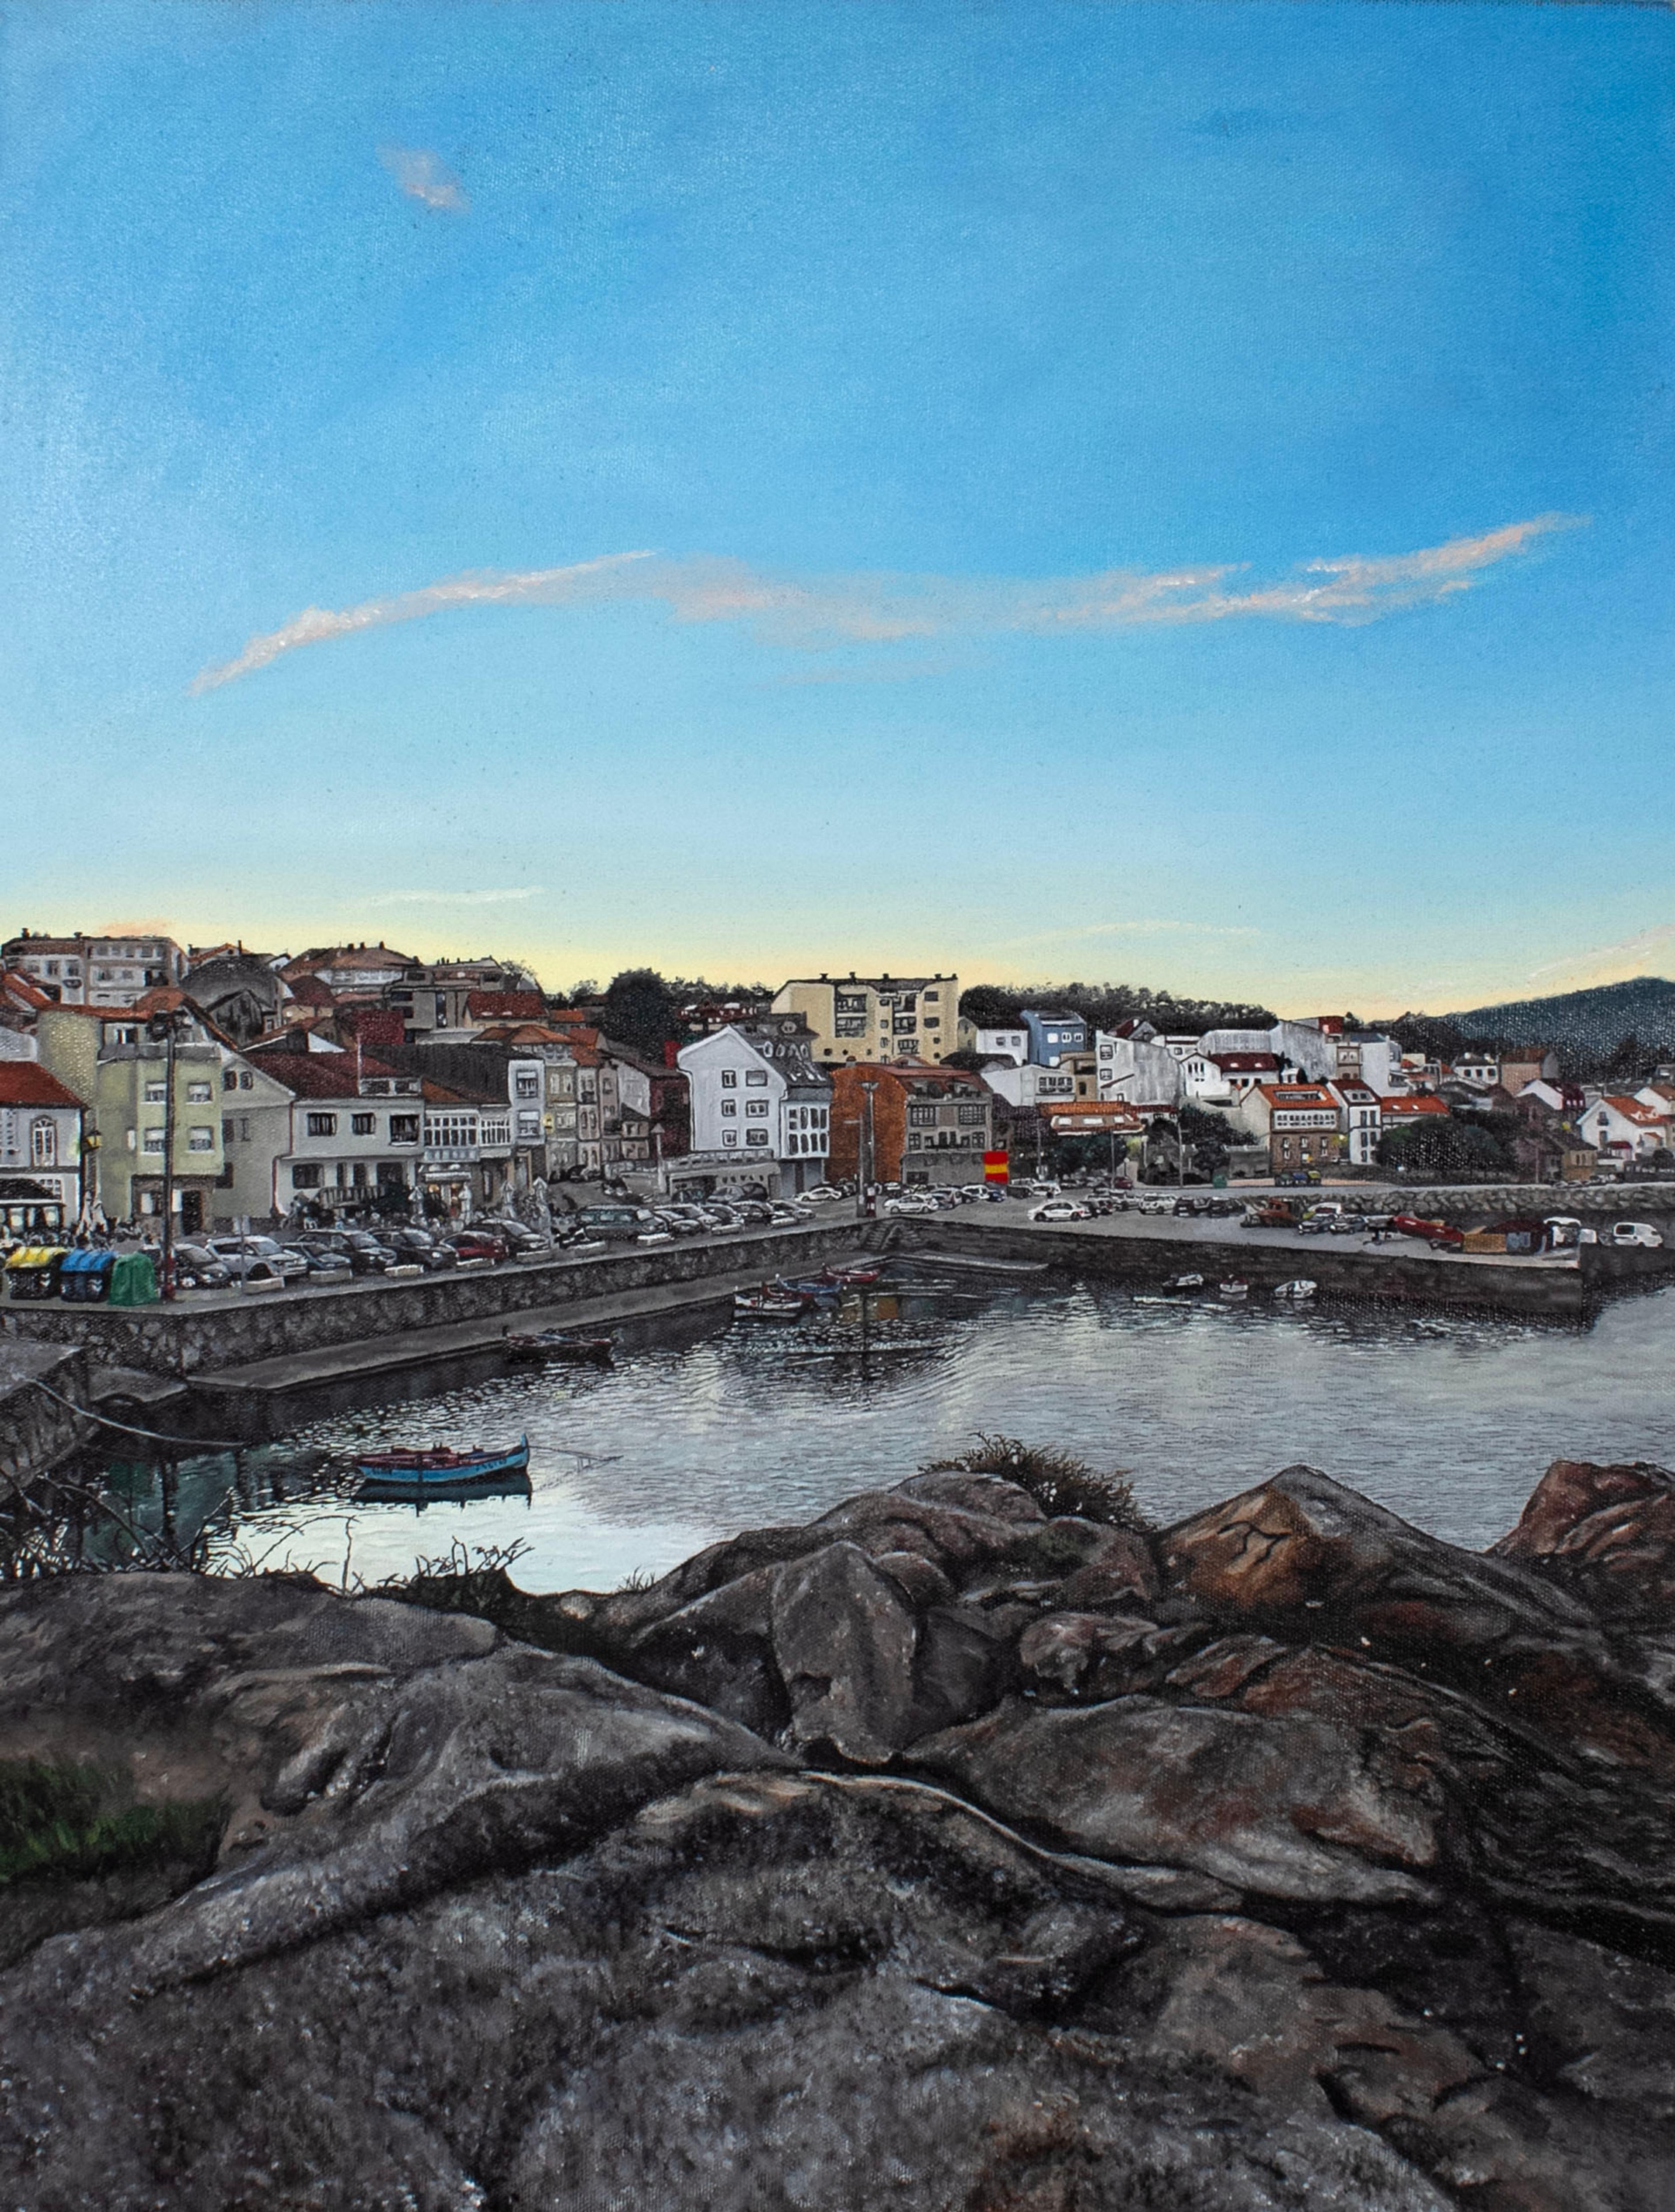 Oil-on-canvas painting of the shore and harbor of Palmeira, Spain. Gray rocks and soil are shown in the bottom foreground. Behind the rocks are the gray waters of the harbor, with a few small sailboats moored to the docks in the rear. Behind the docks, rows of white and beige buildings recede into the distance behind a long row of parked cars and vendor stalls. A faint range of short hills is on the horizon. The bright blue sky overhead takes up the top half of the painting.